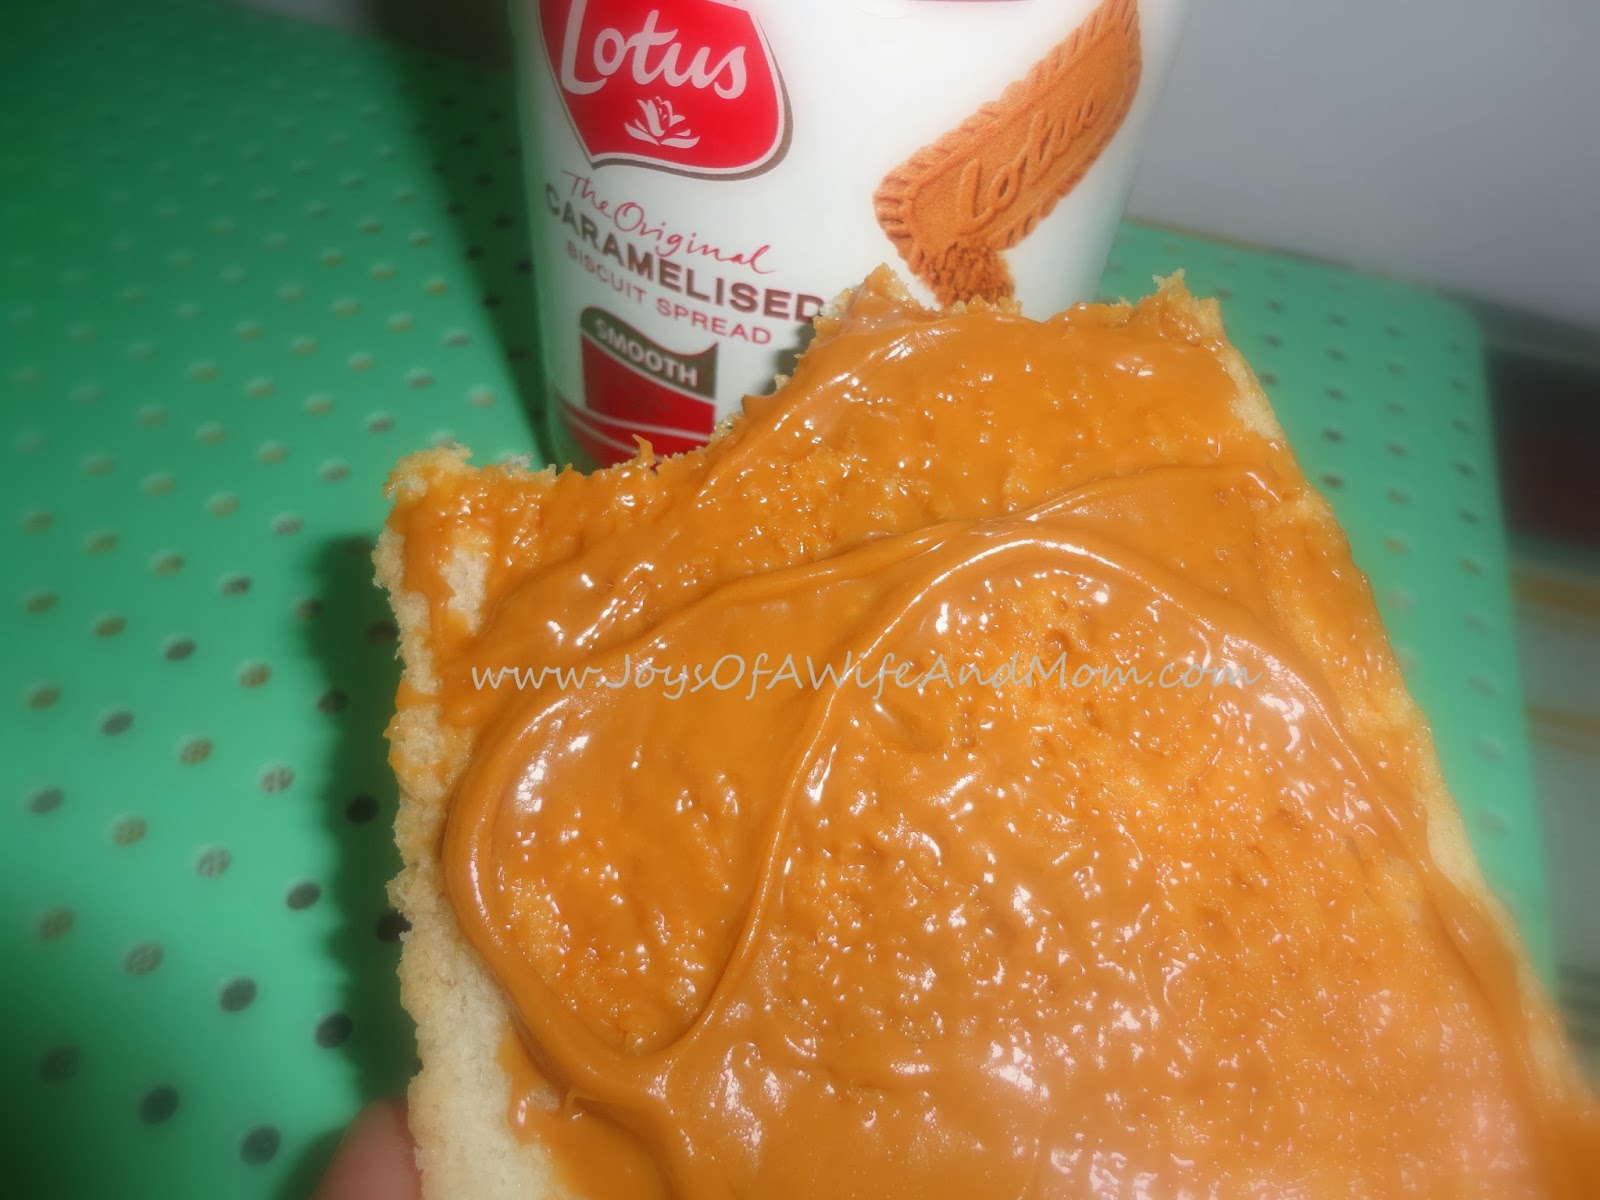 Product Review: Lotus Caramelised Biscuit Spread